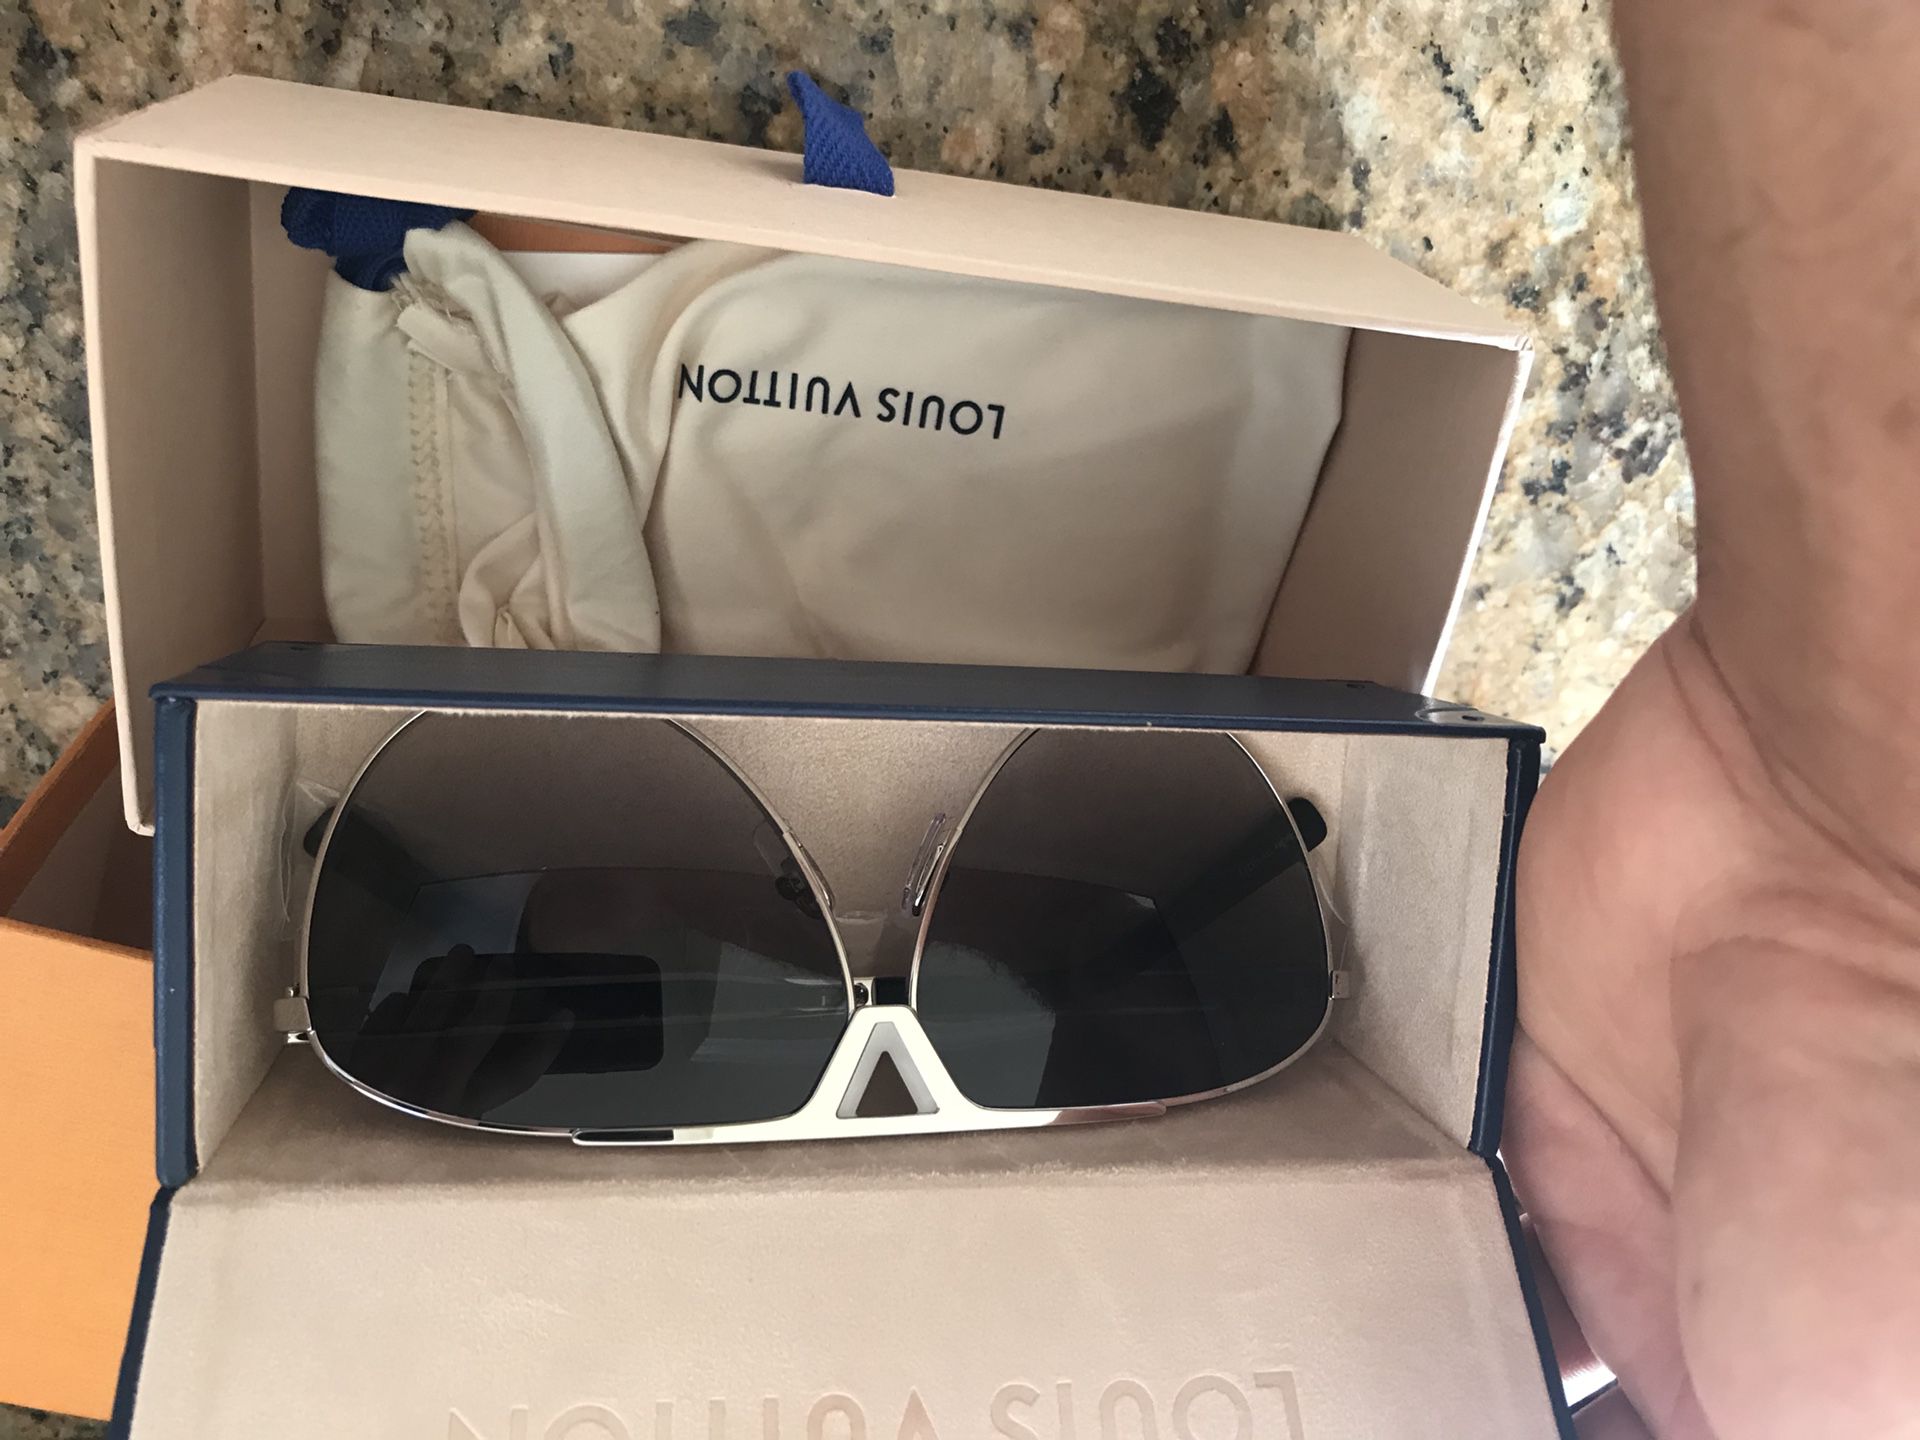 Authentic Louis Vuitton Sunglasses for Sale in Hartford, CT - OfferUp